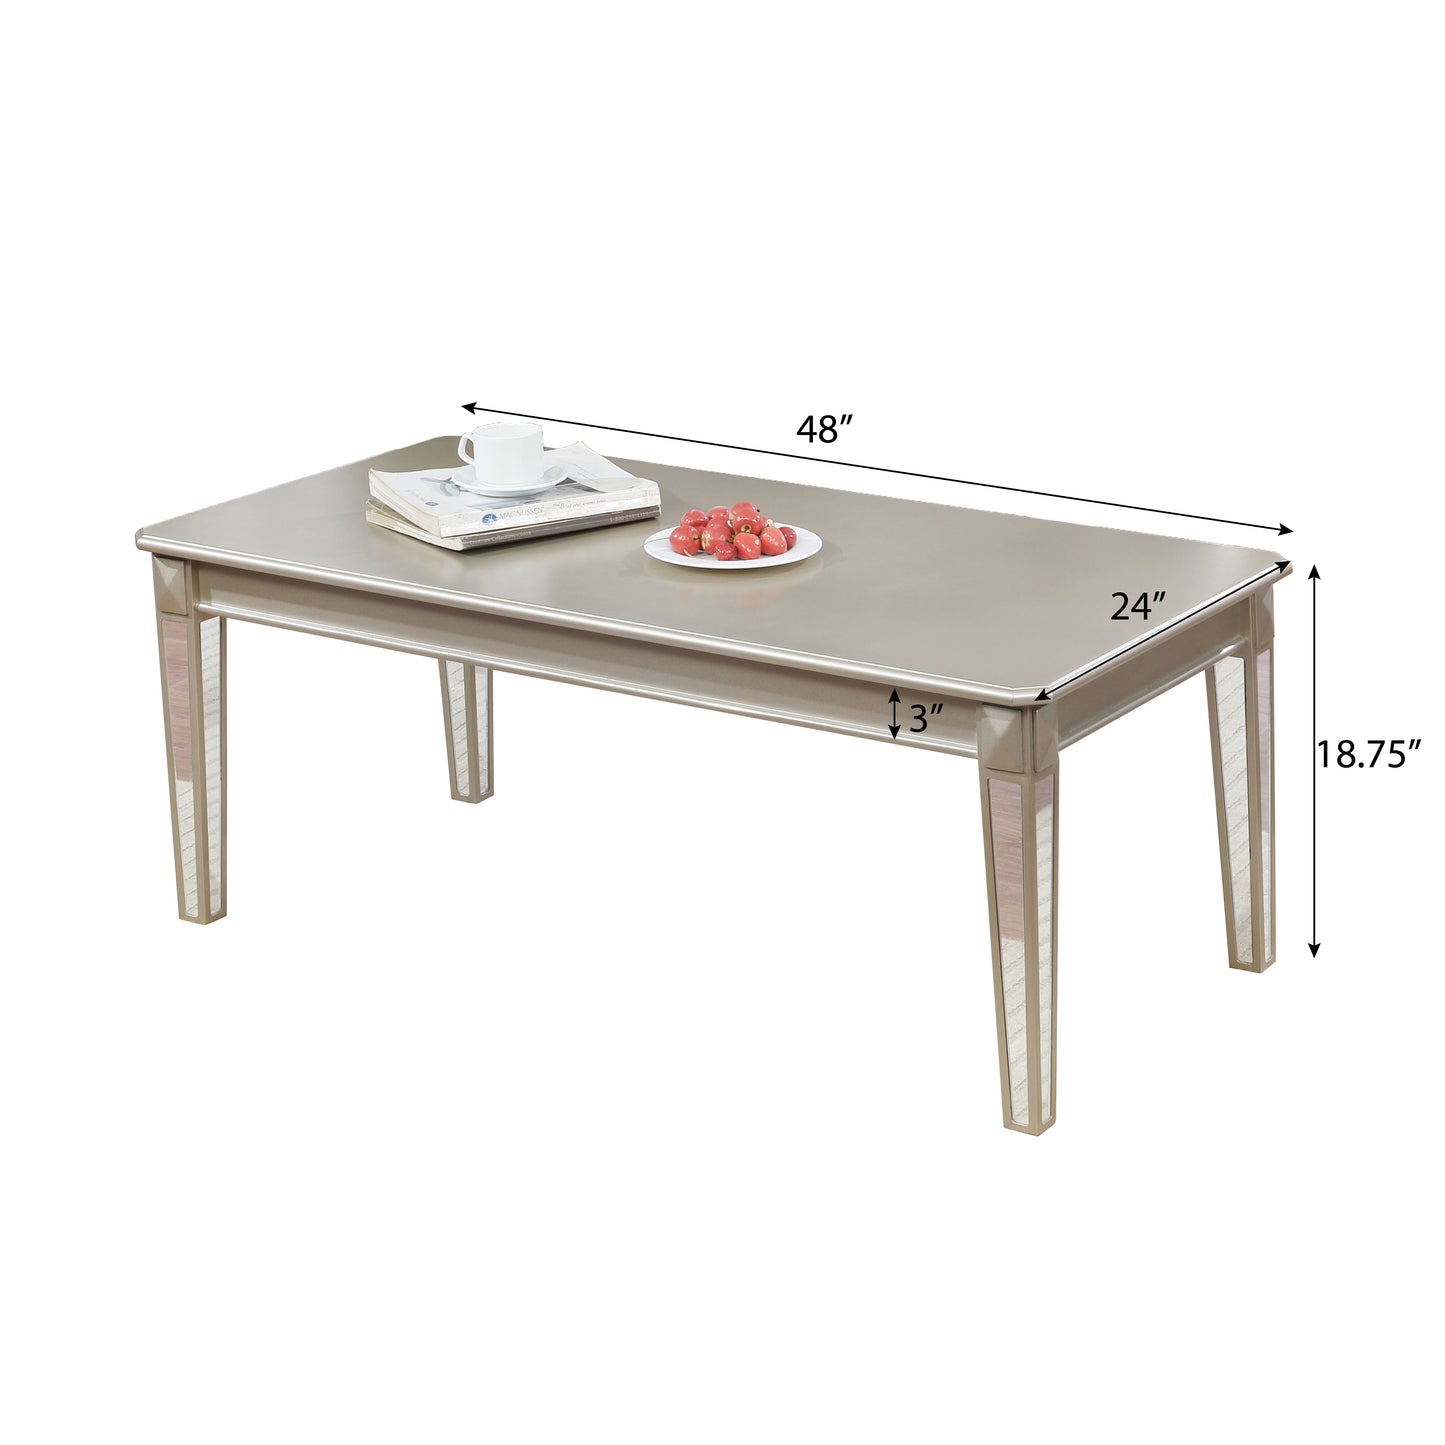 Barent Contemporary Wood Coffee Table with Mirrored Legs, Champagne